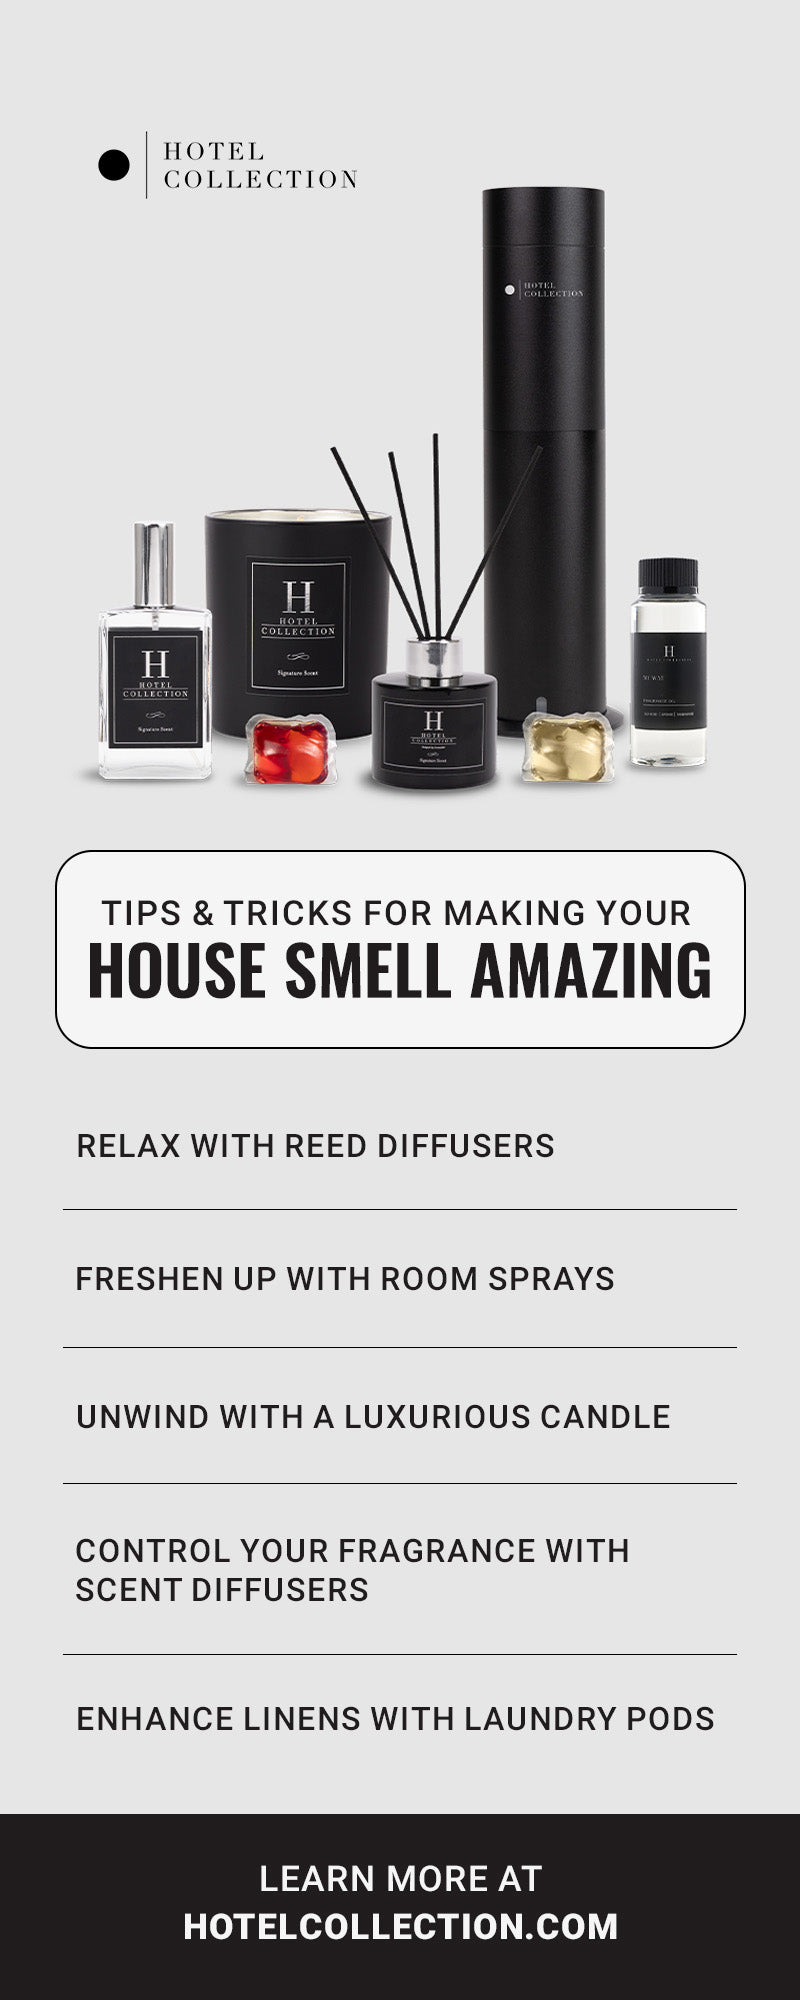 Tips & Tricks for Making Your House Smell Amazing